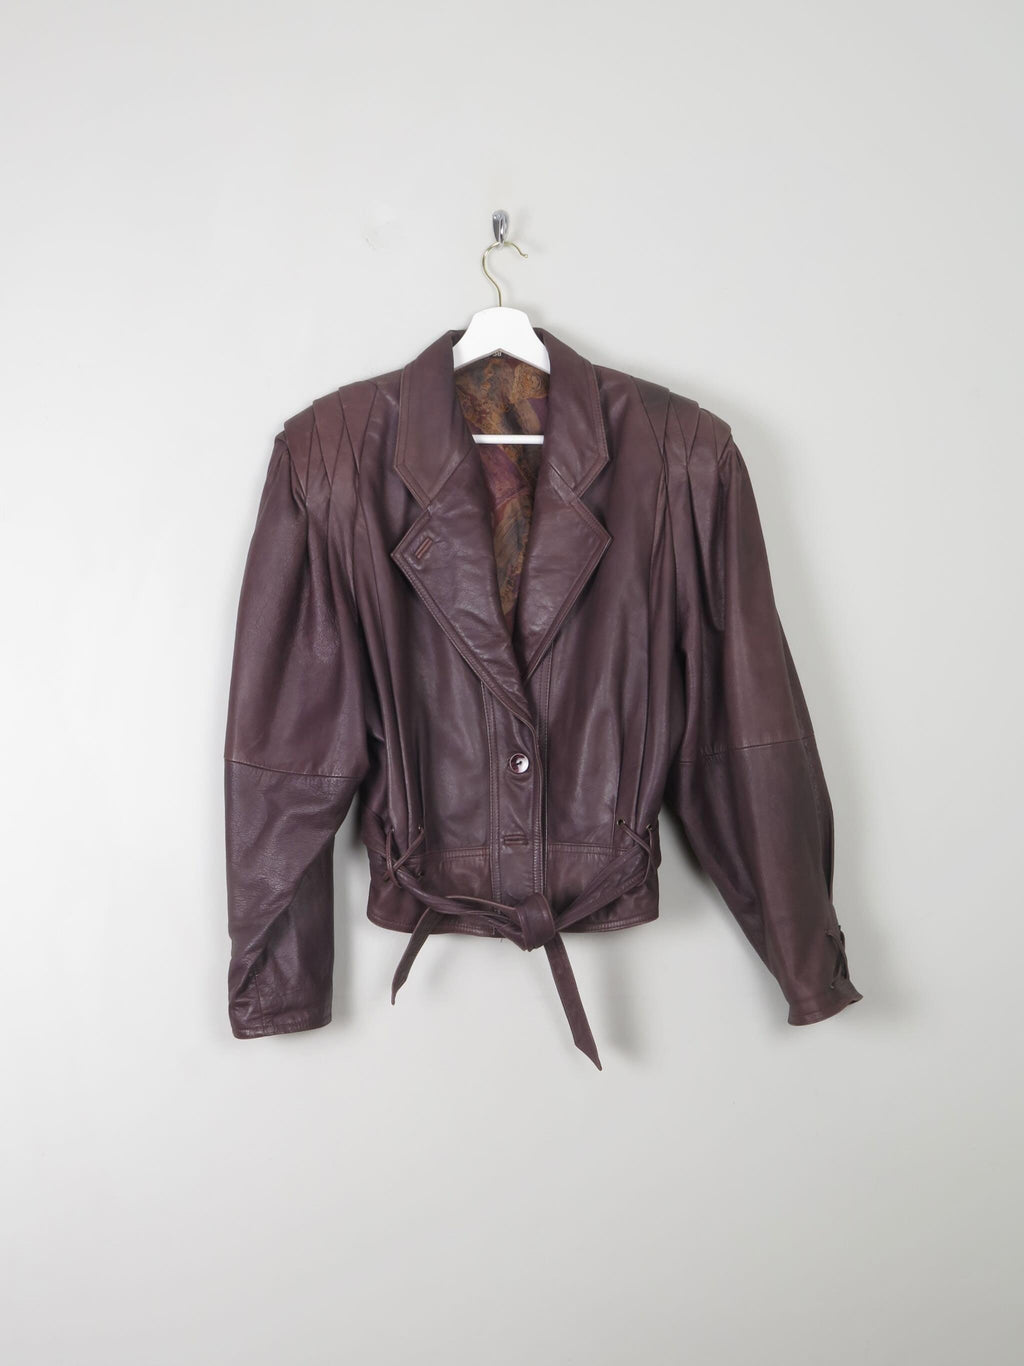 Women's Vintage Cropped Leather Jacket Plum S/M - The Harlequin